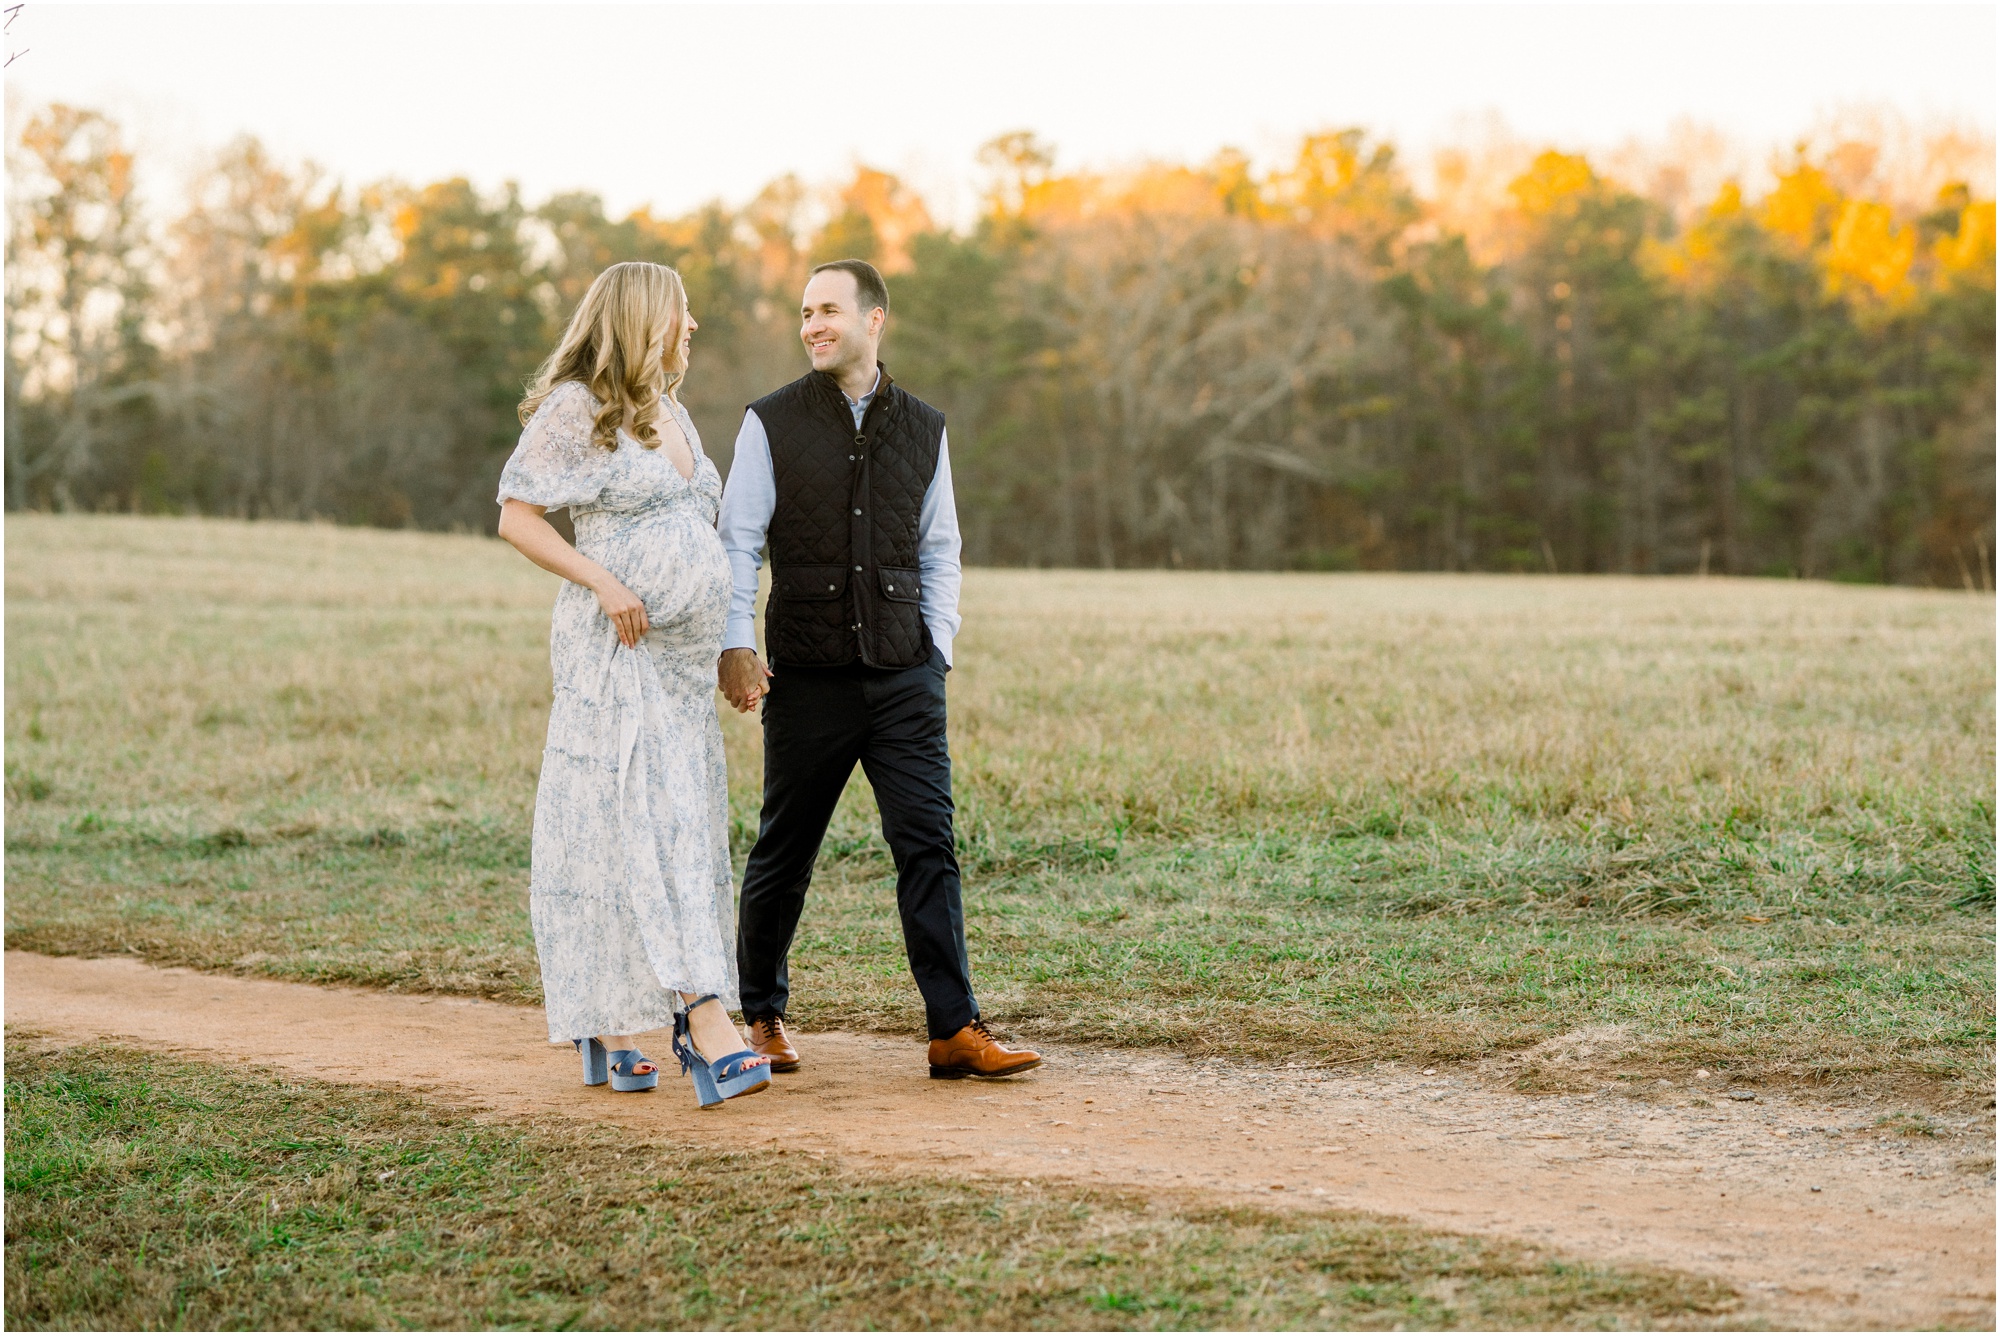 A pregnant woman holds her husbands hand and they smile towards each other as they walk down a dirt path in a green field for Atlanta maternity photos.